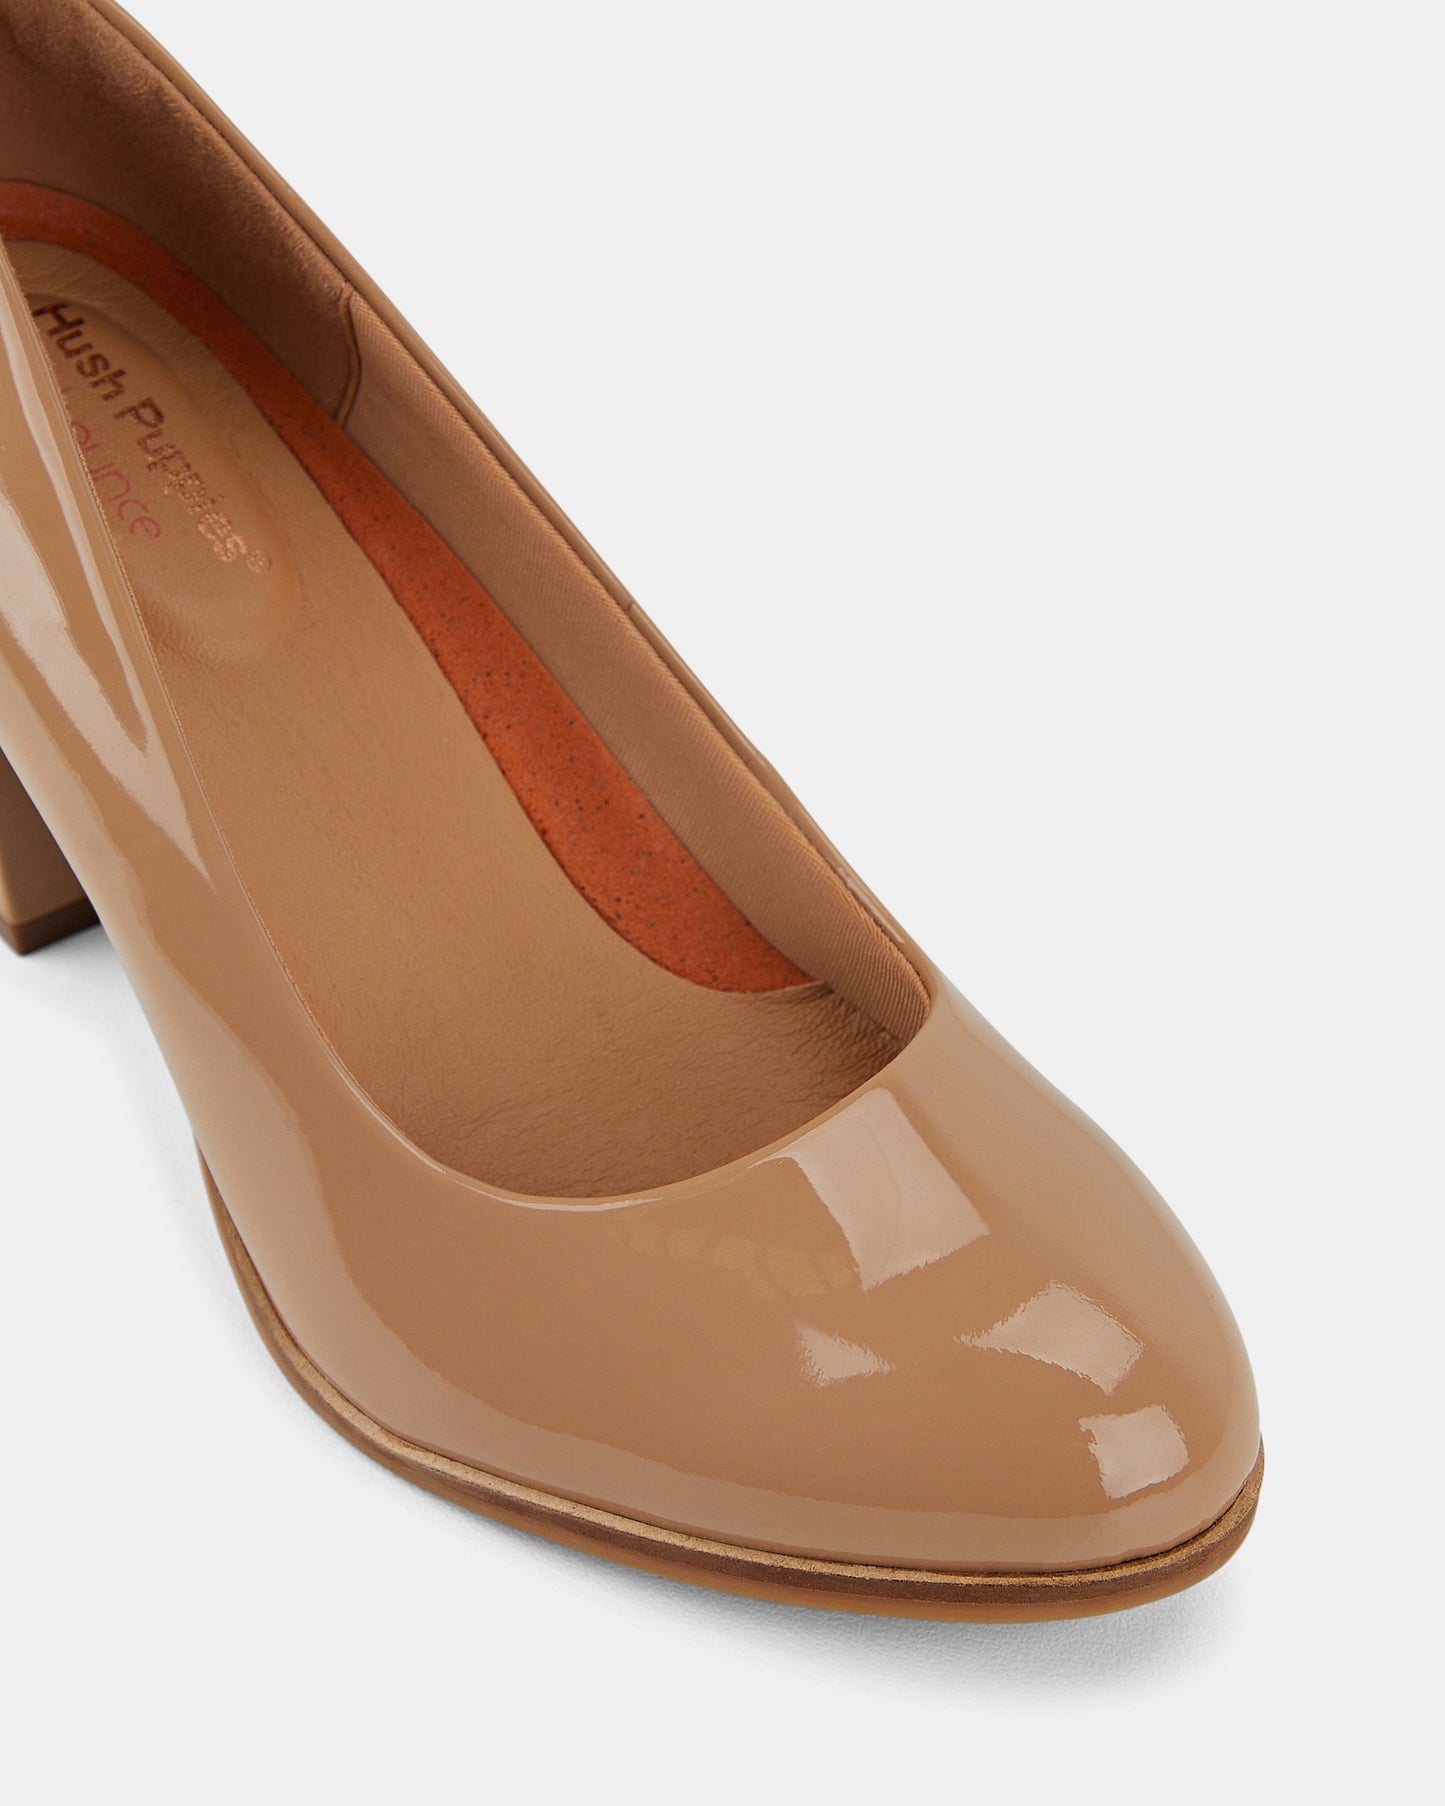 The Tall Pump Nude Patent